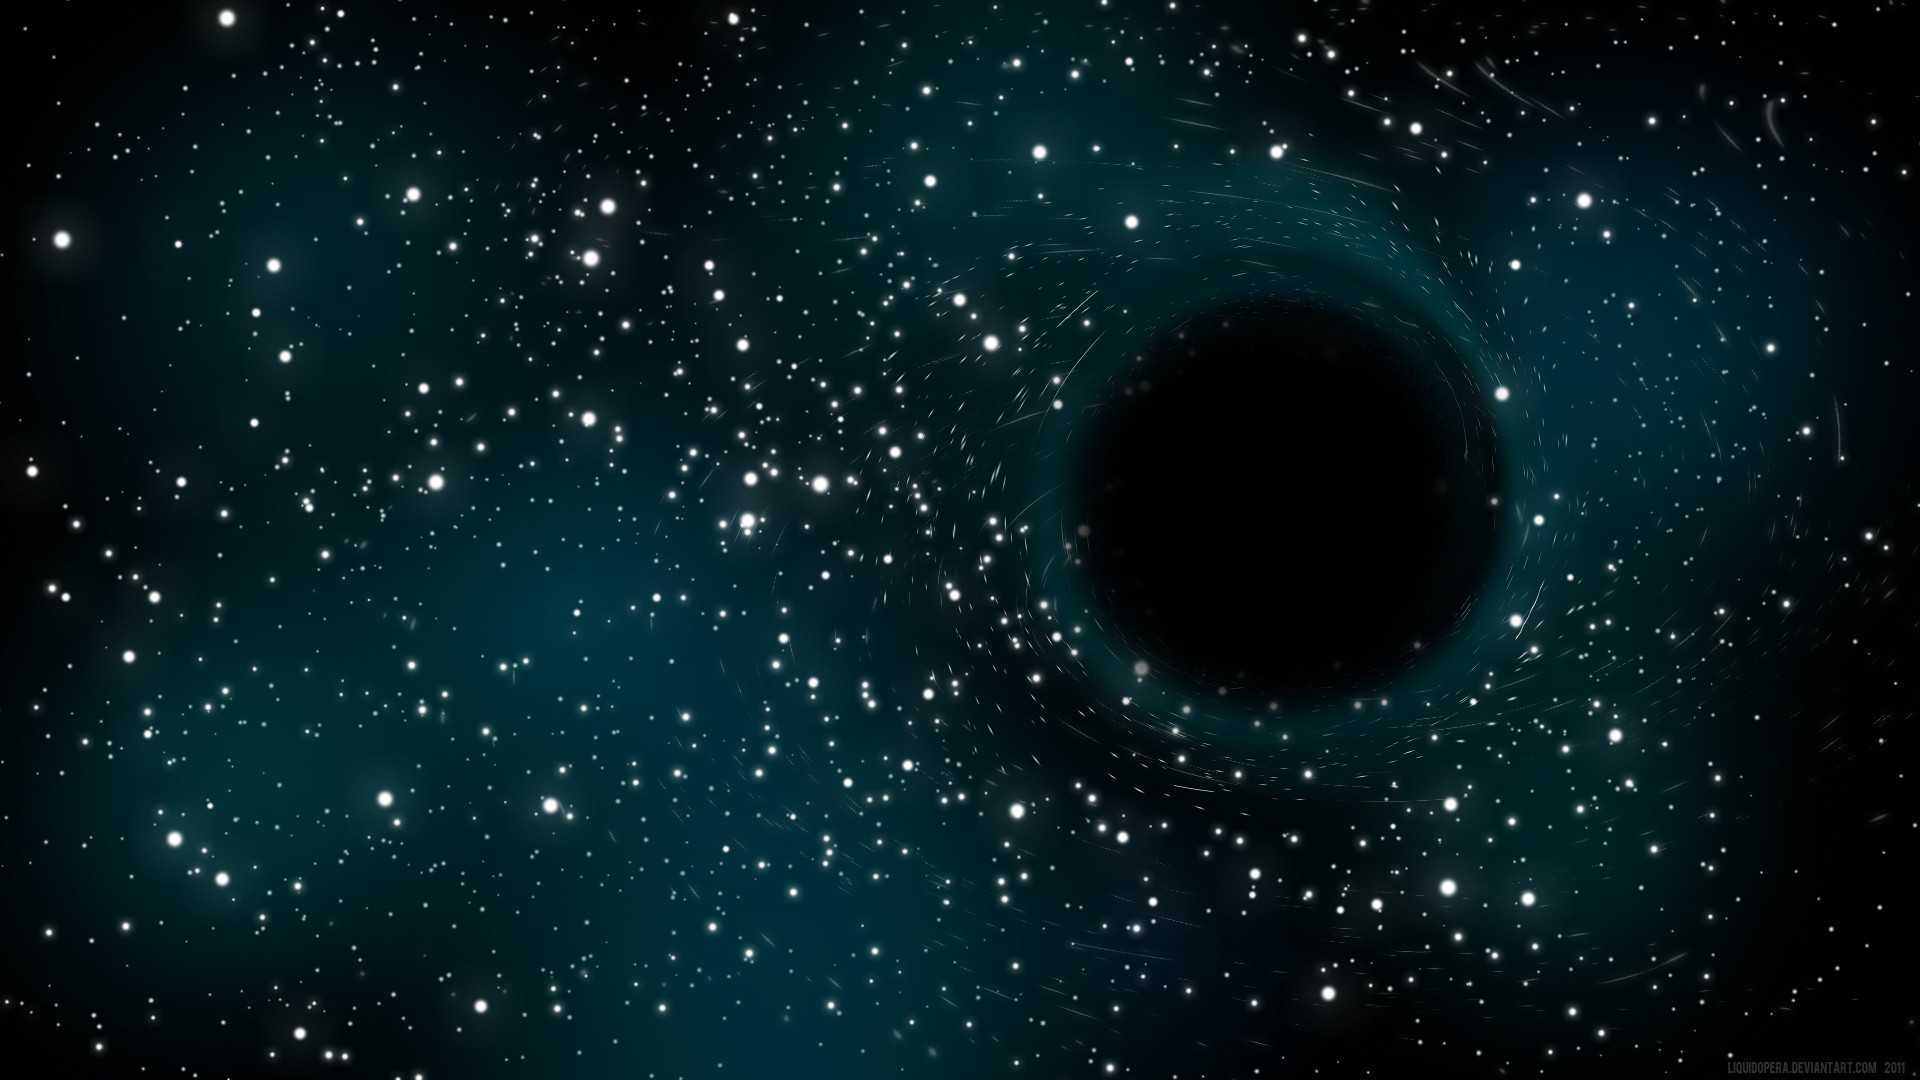 1920x1080 Supermassive Black Hole Wallpaper 25247 Hd Wallpapers in Space 